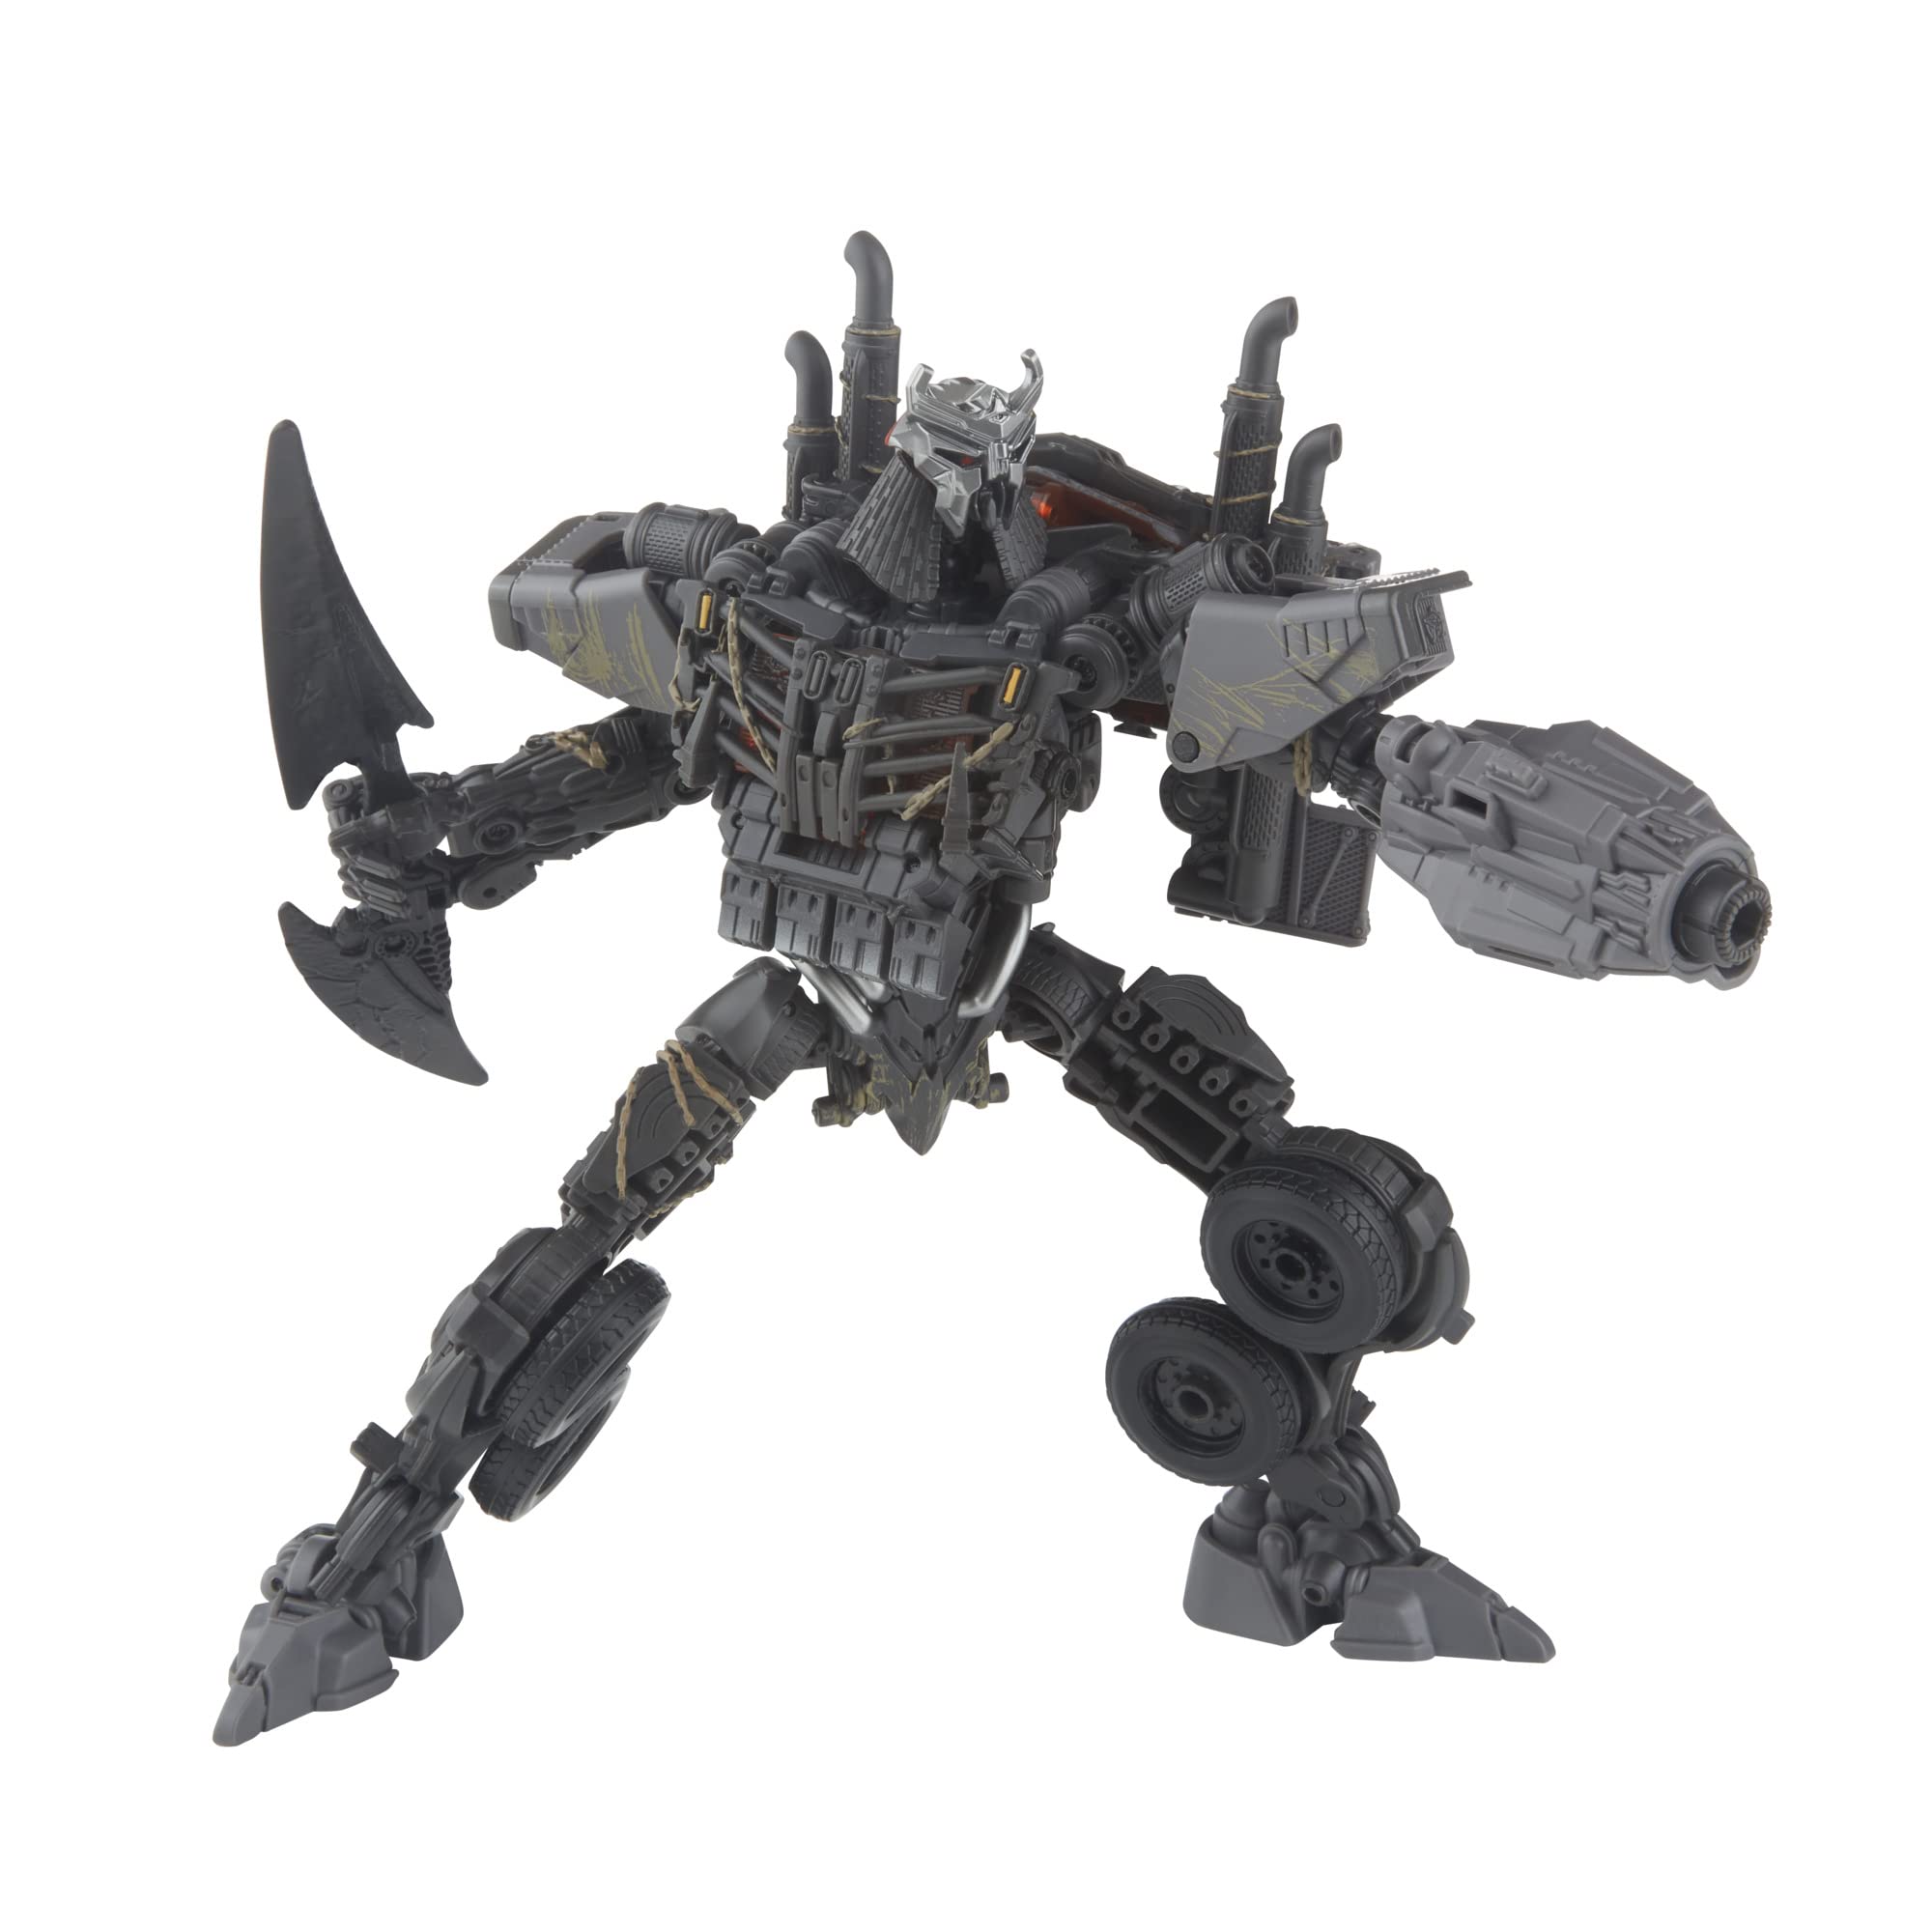 Transformers Toys Studio Series Leader Class 101 Scourge Toy, 8.5-inch, Action Figure for Boys and Girls Ages 8 and Up